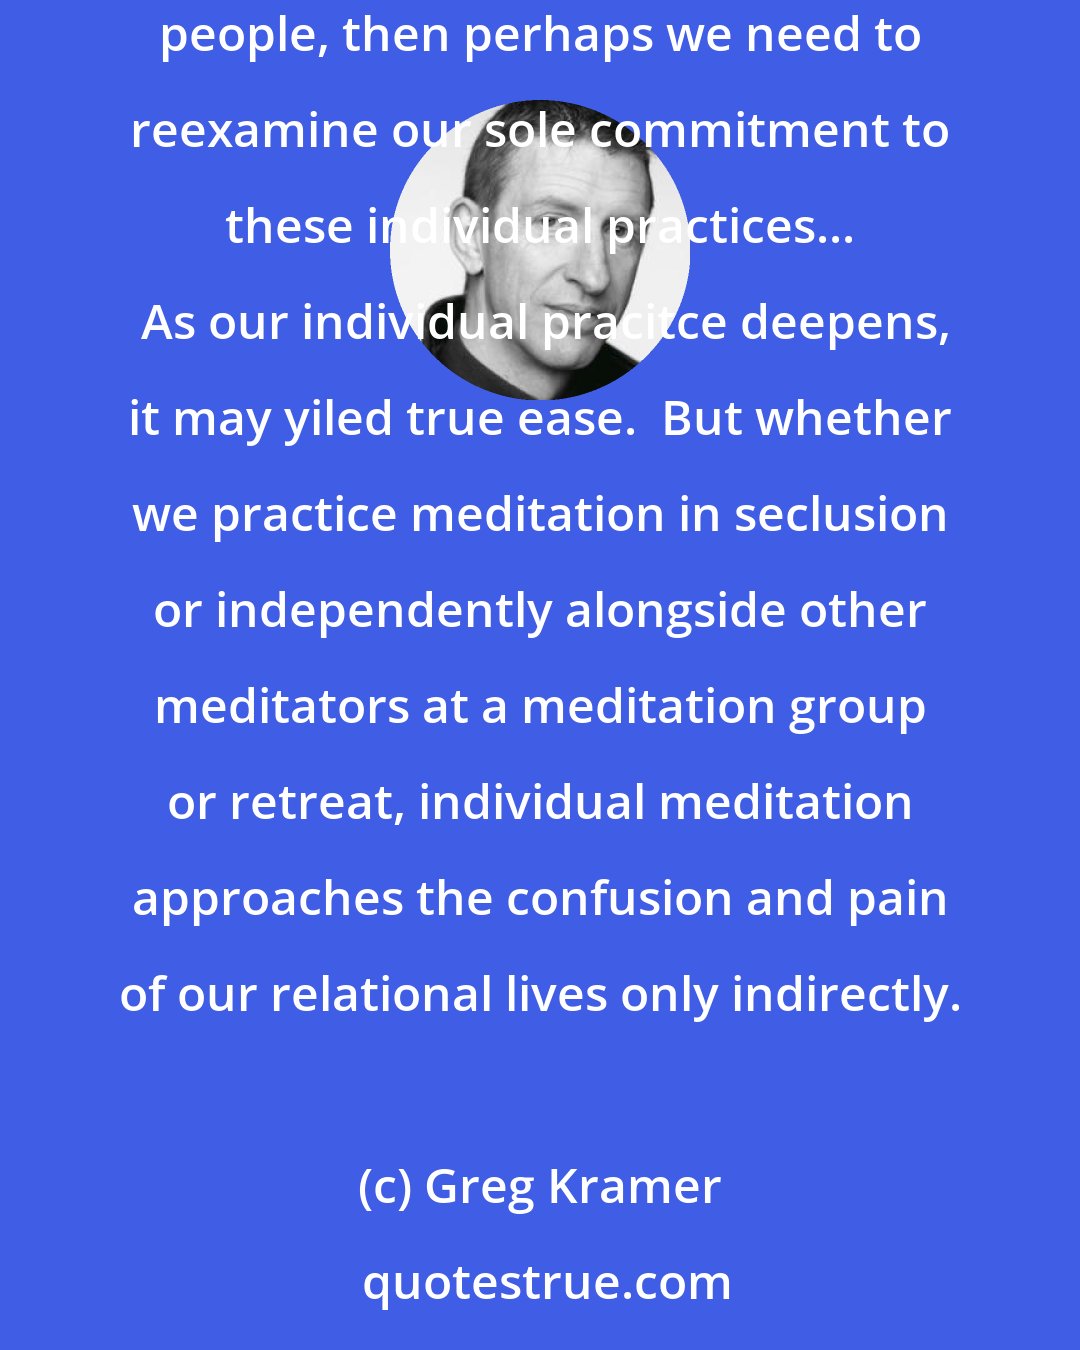 Greg Kramer: We meditate alone but live our lives with other people; a gap is inevitable.  If our path is to lead to less suffering, nd much of our suffering is with other people, then perhaps we need to reexamine our sole commitment to these individual practices...  As our individual pracitce deepens, it may yiled true ease.  But whether we practice meditation in seclusion or independently alongside other meditators at a meditation group or retreat, individual meditation approaches the confusion and pain of our relational lives only indirectly.